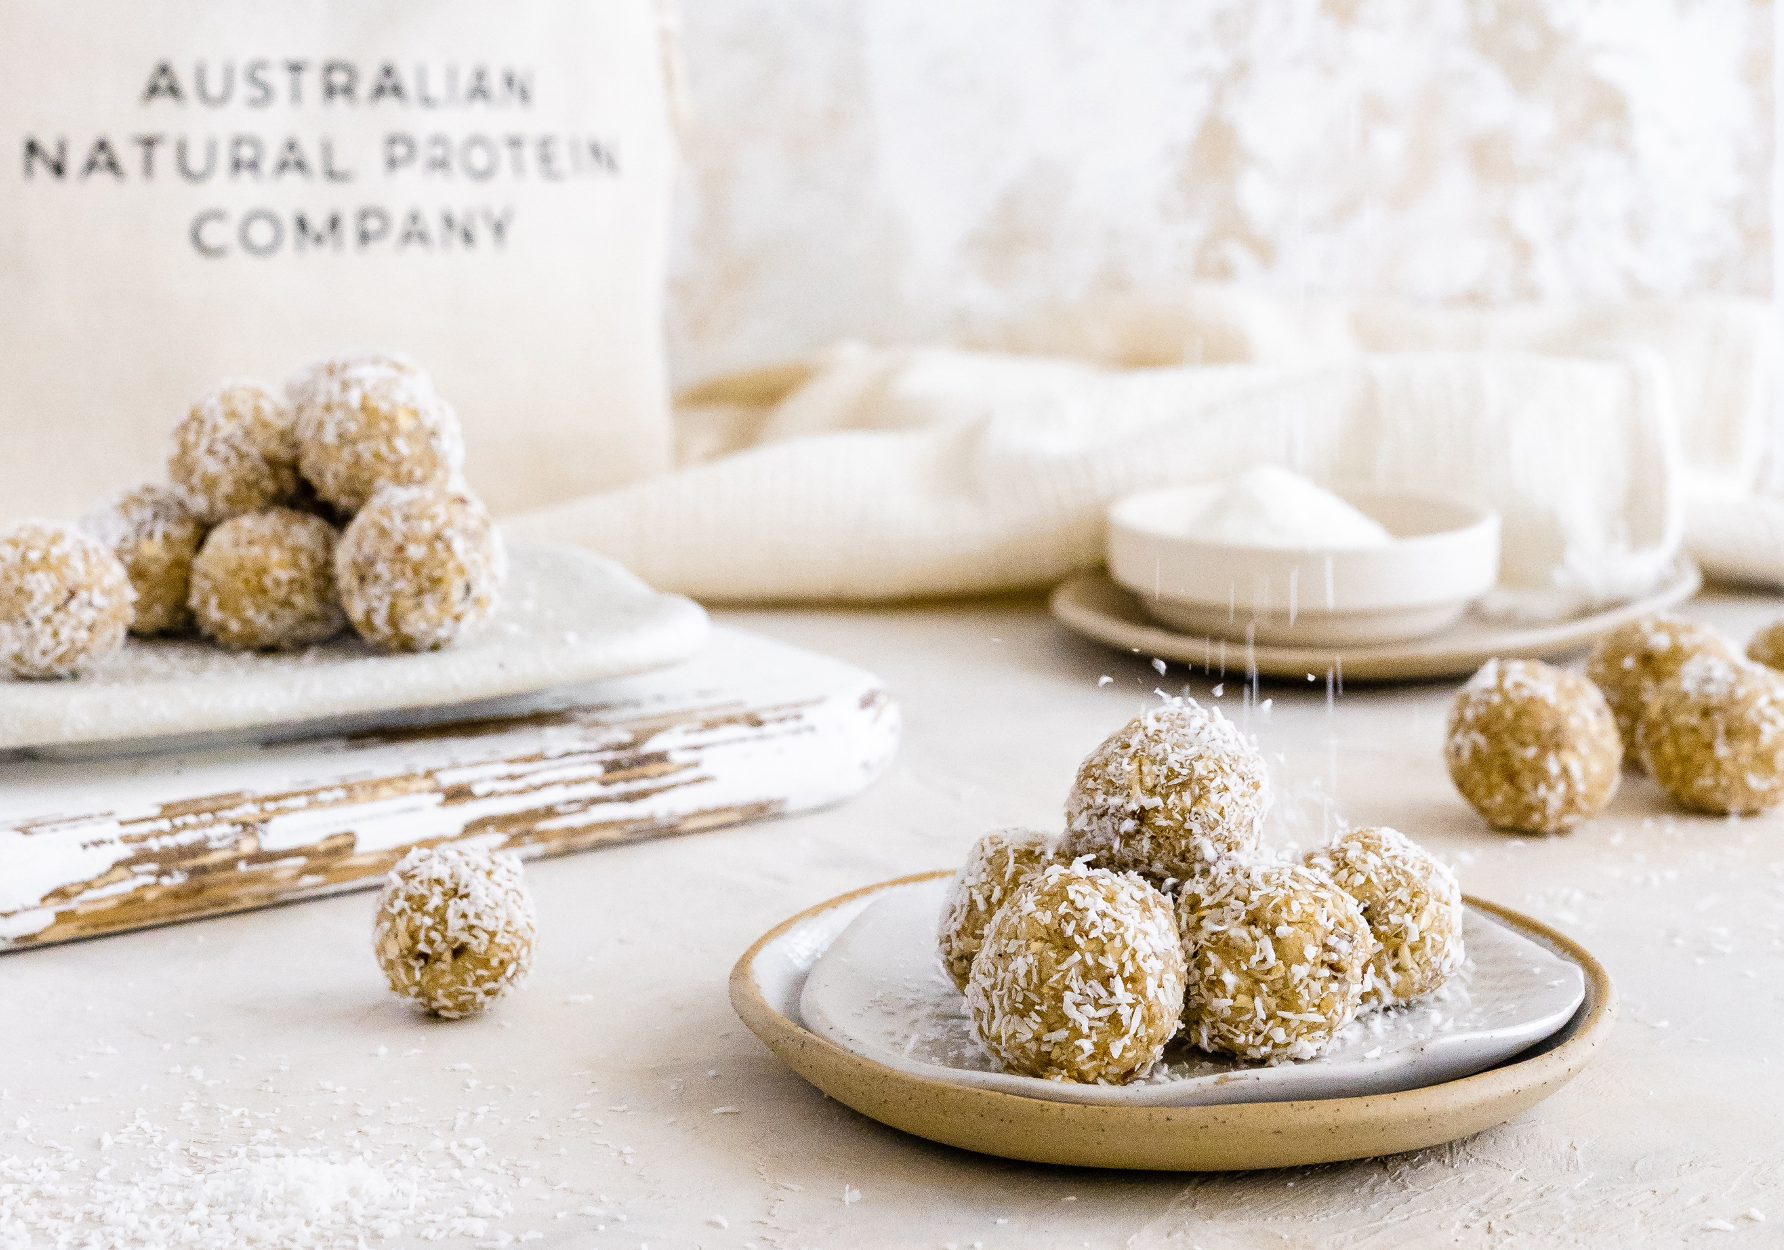 Pictured are freshly made Vanilla Bean Protein bliss balls on a plate with Australian Natural Protein Company Package of Organic Vanilla Bean Protein Whey Powder in the background